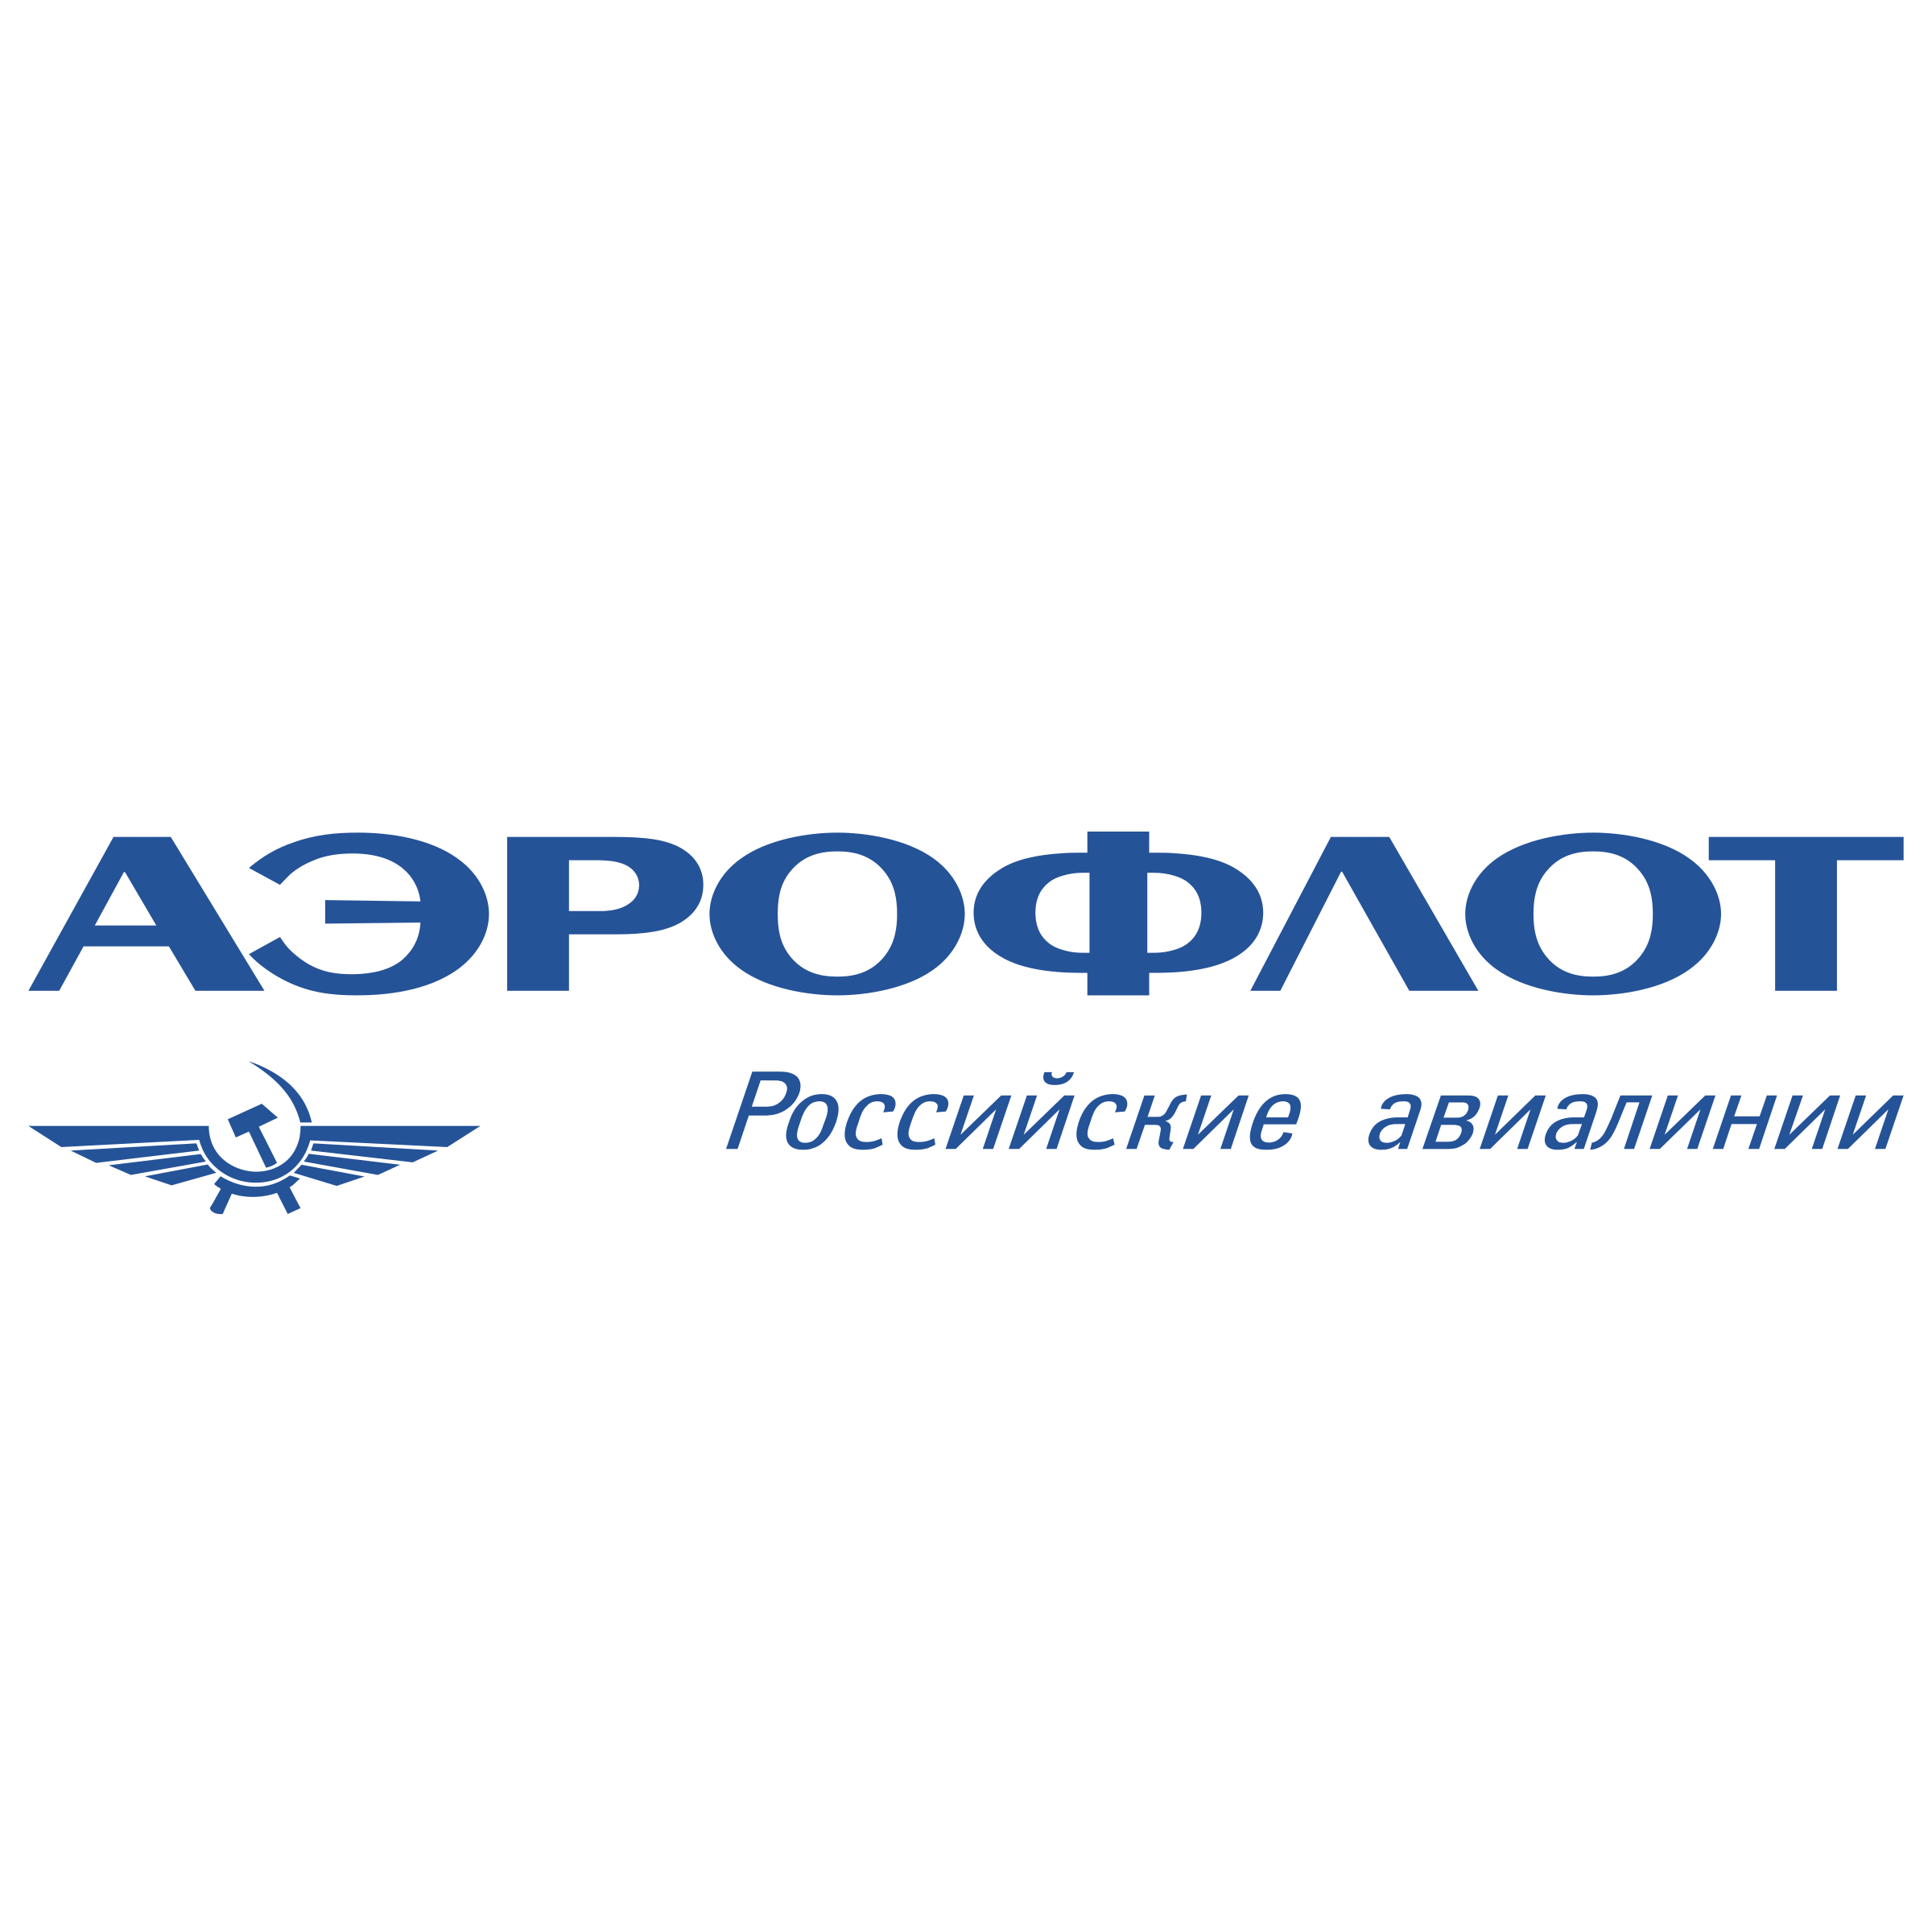 Russia Airline Logo - Aeroflot Russian Airlines Logo PNG Transparent & SVG Vector ...